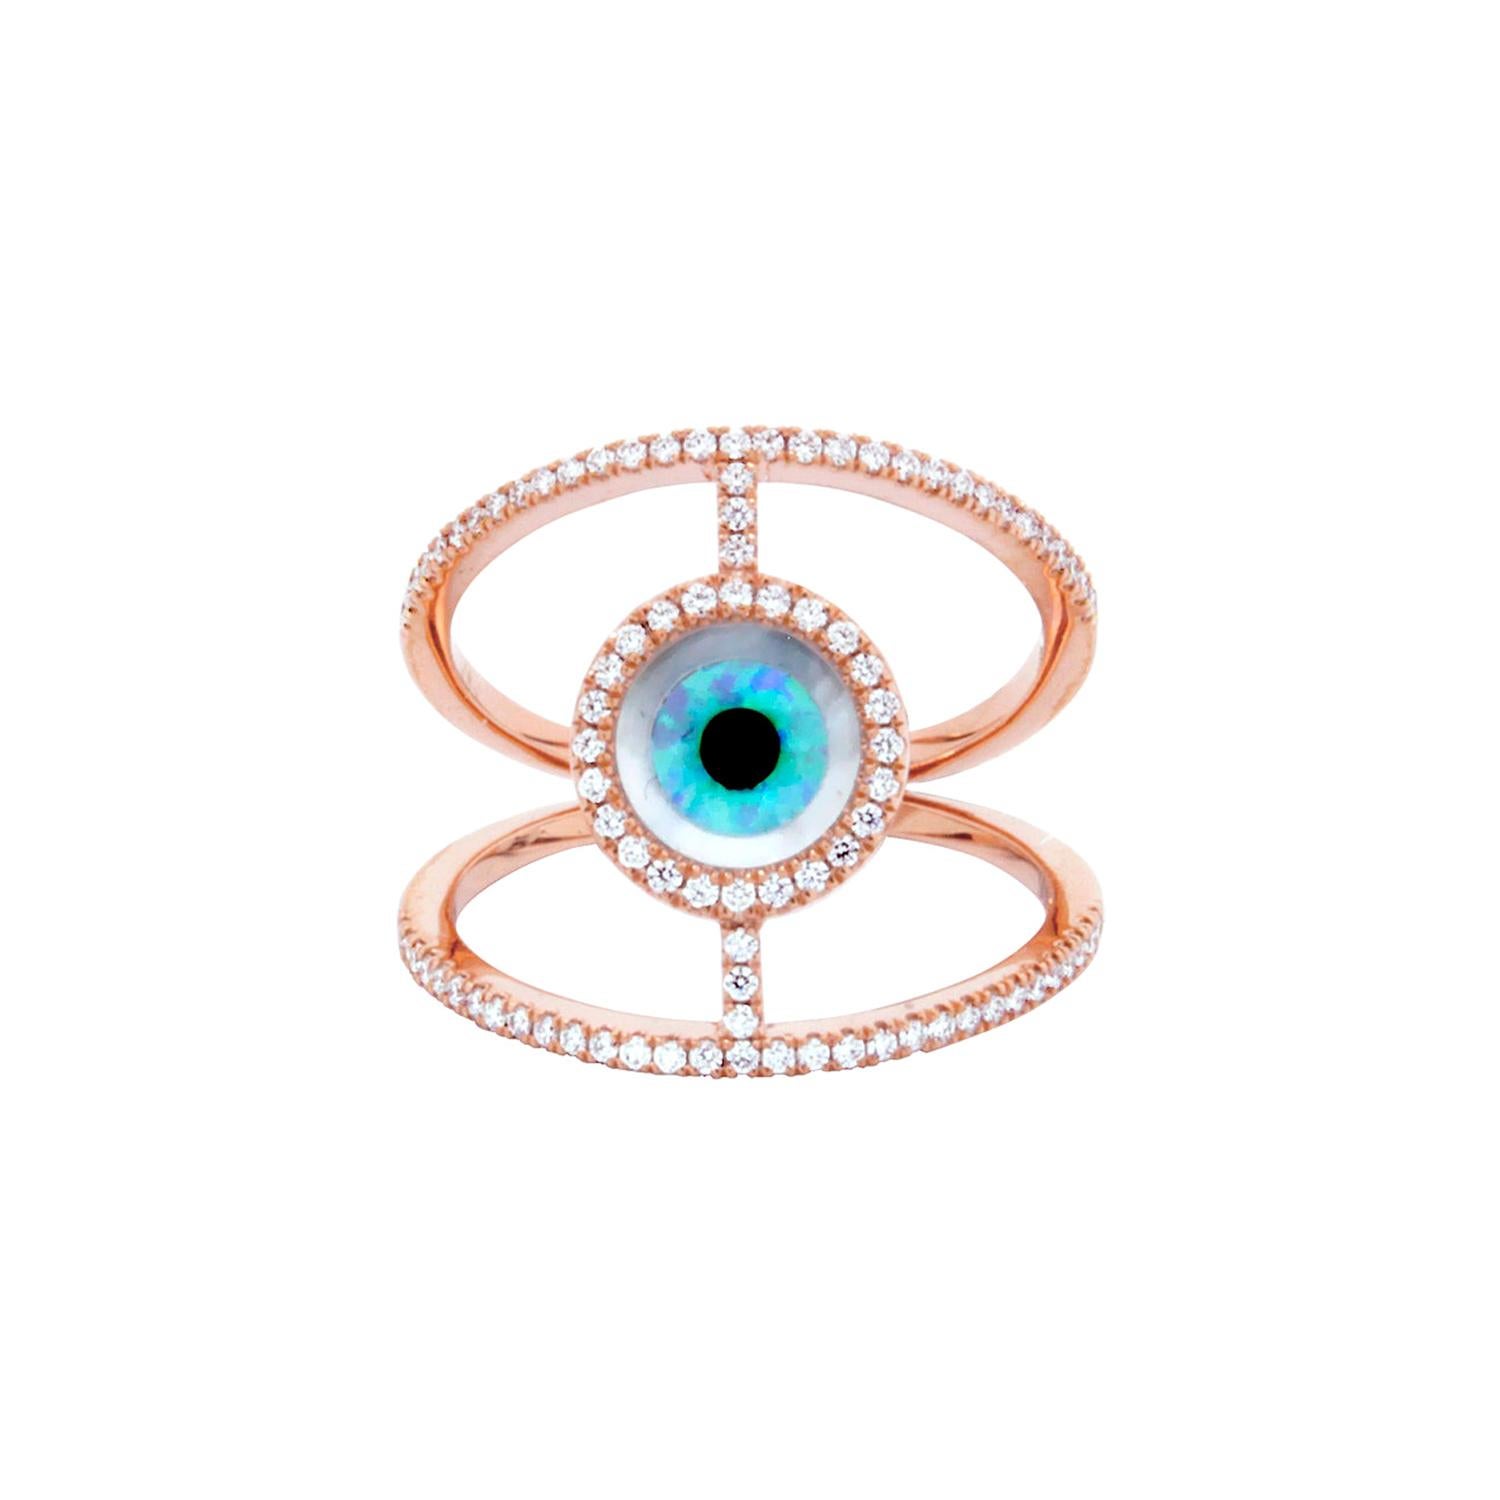 18 Karat Rose P Gold Ring with Diamonds, Turquoise and Mother of Pearl Inlay For Sale